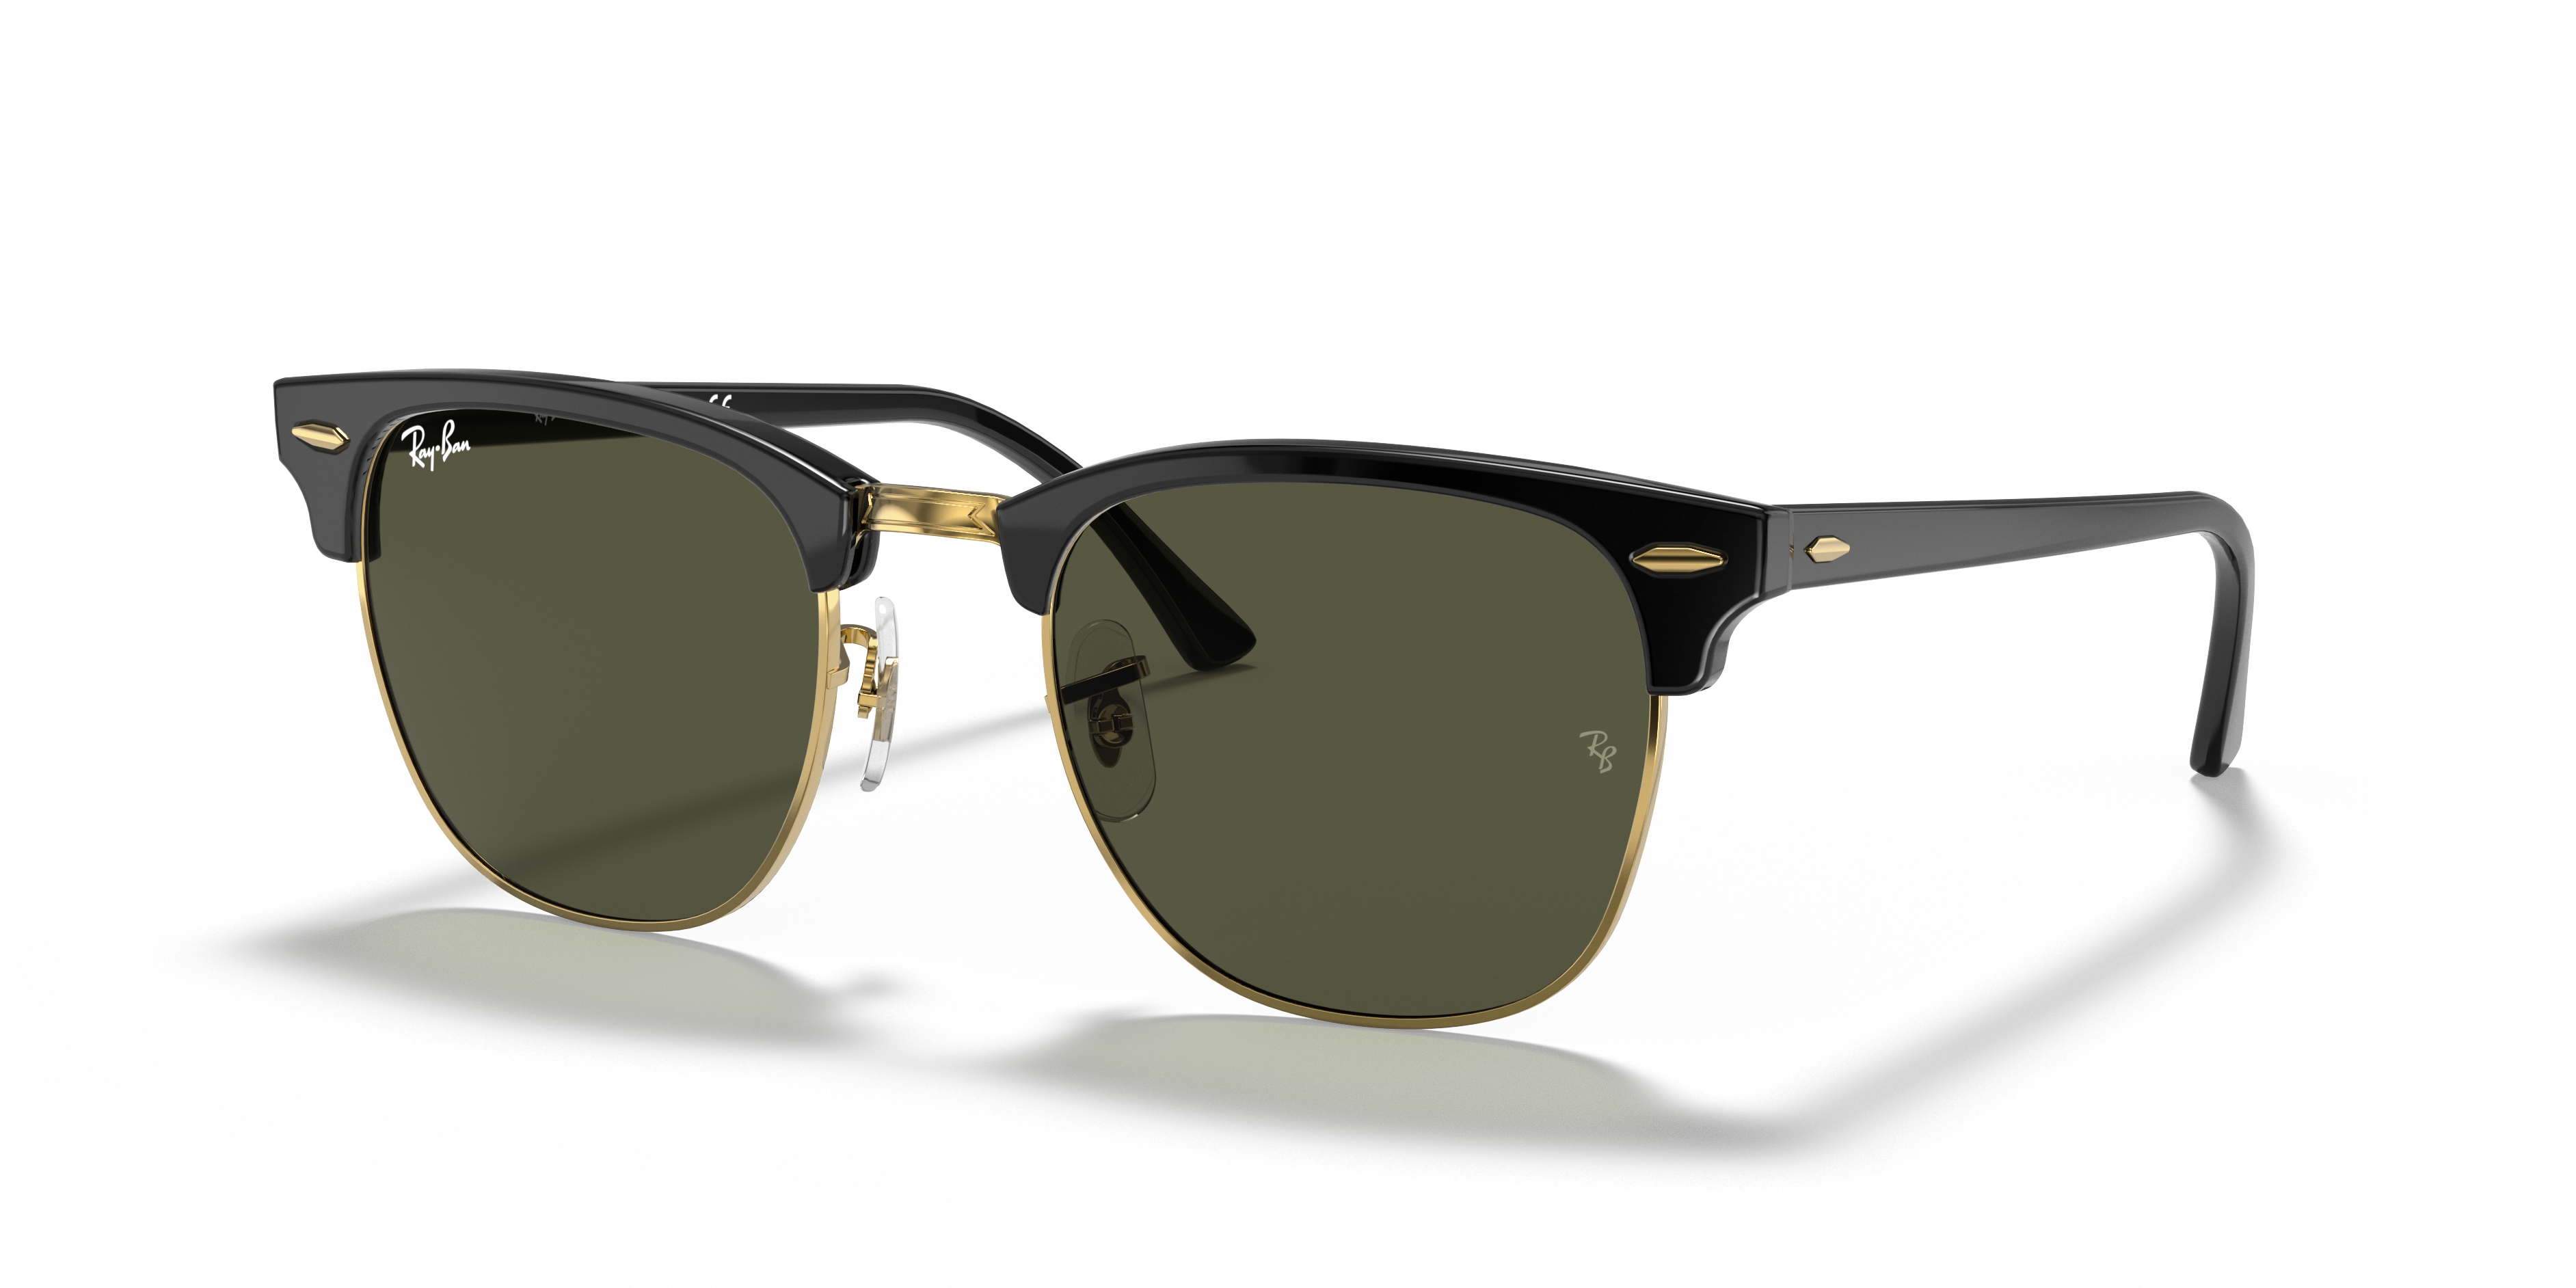 RayBan Clubmaster Classic